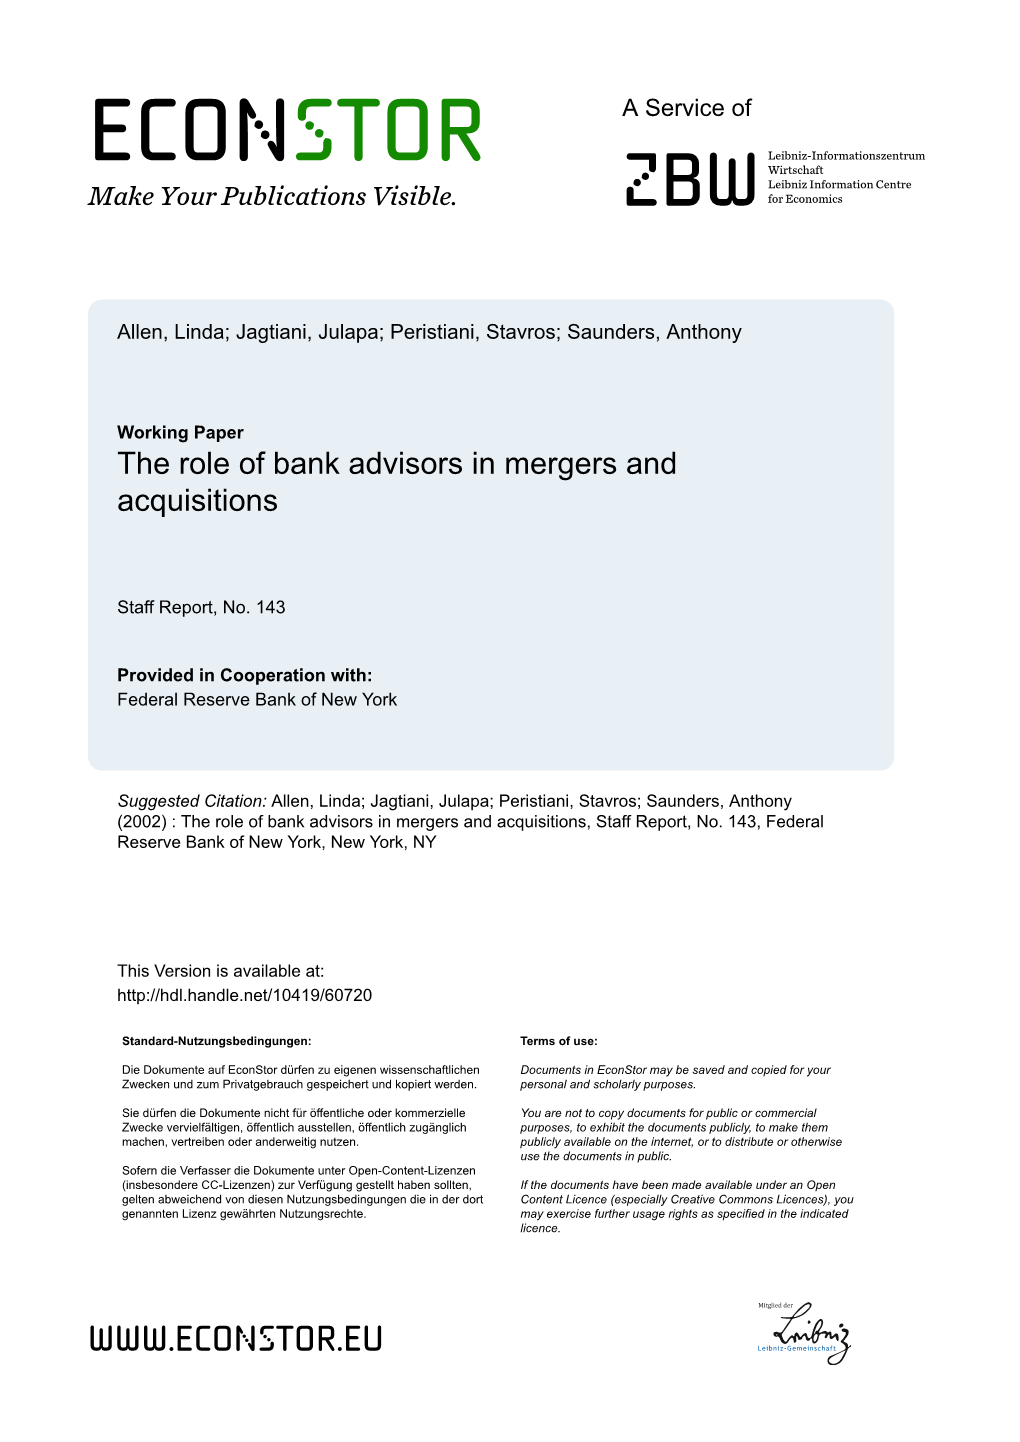 The Role of Bank Advisors in Mergers and Acquisitions